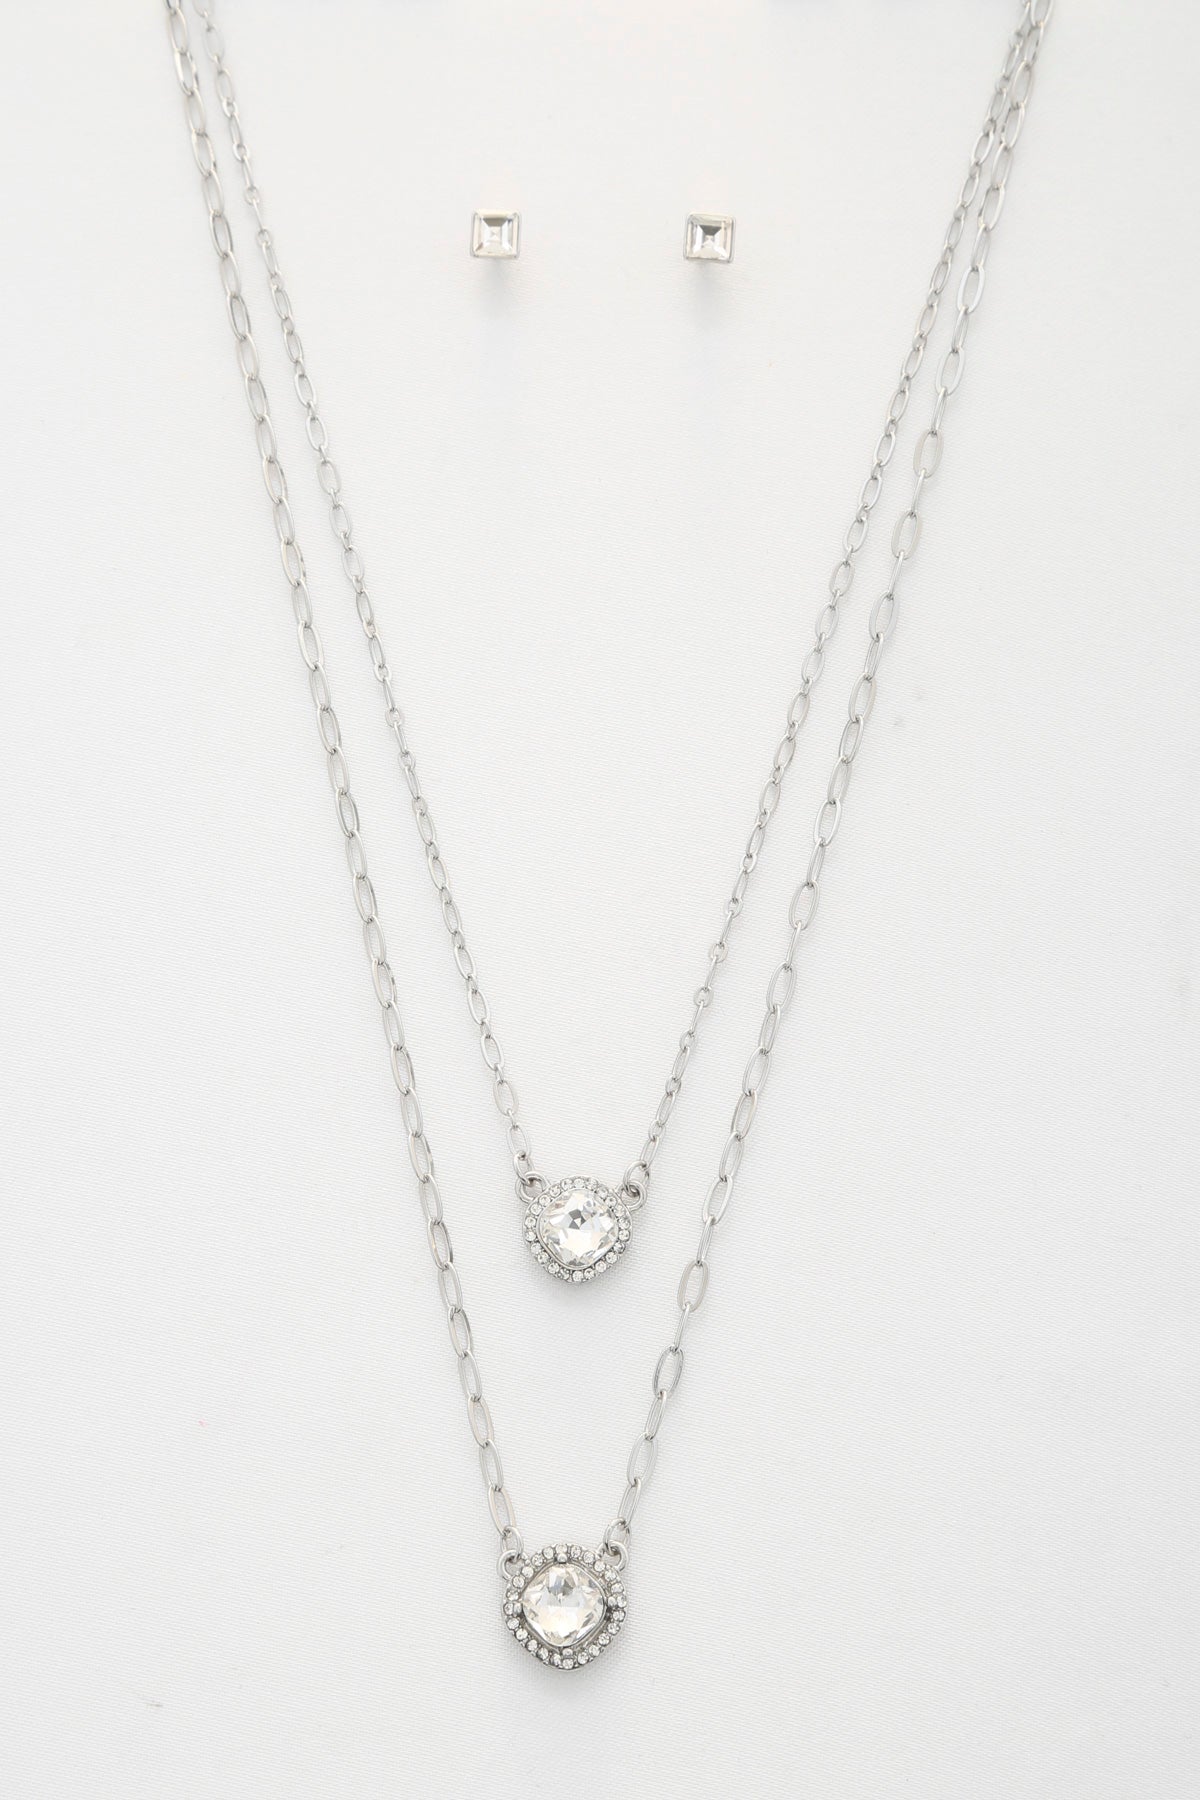 Double Crystal Metal Layered Necklace - Yellowbird Hair Care